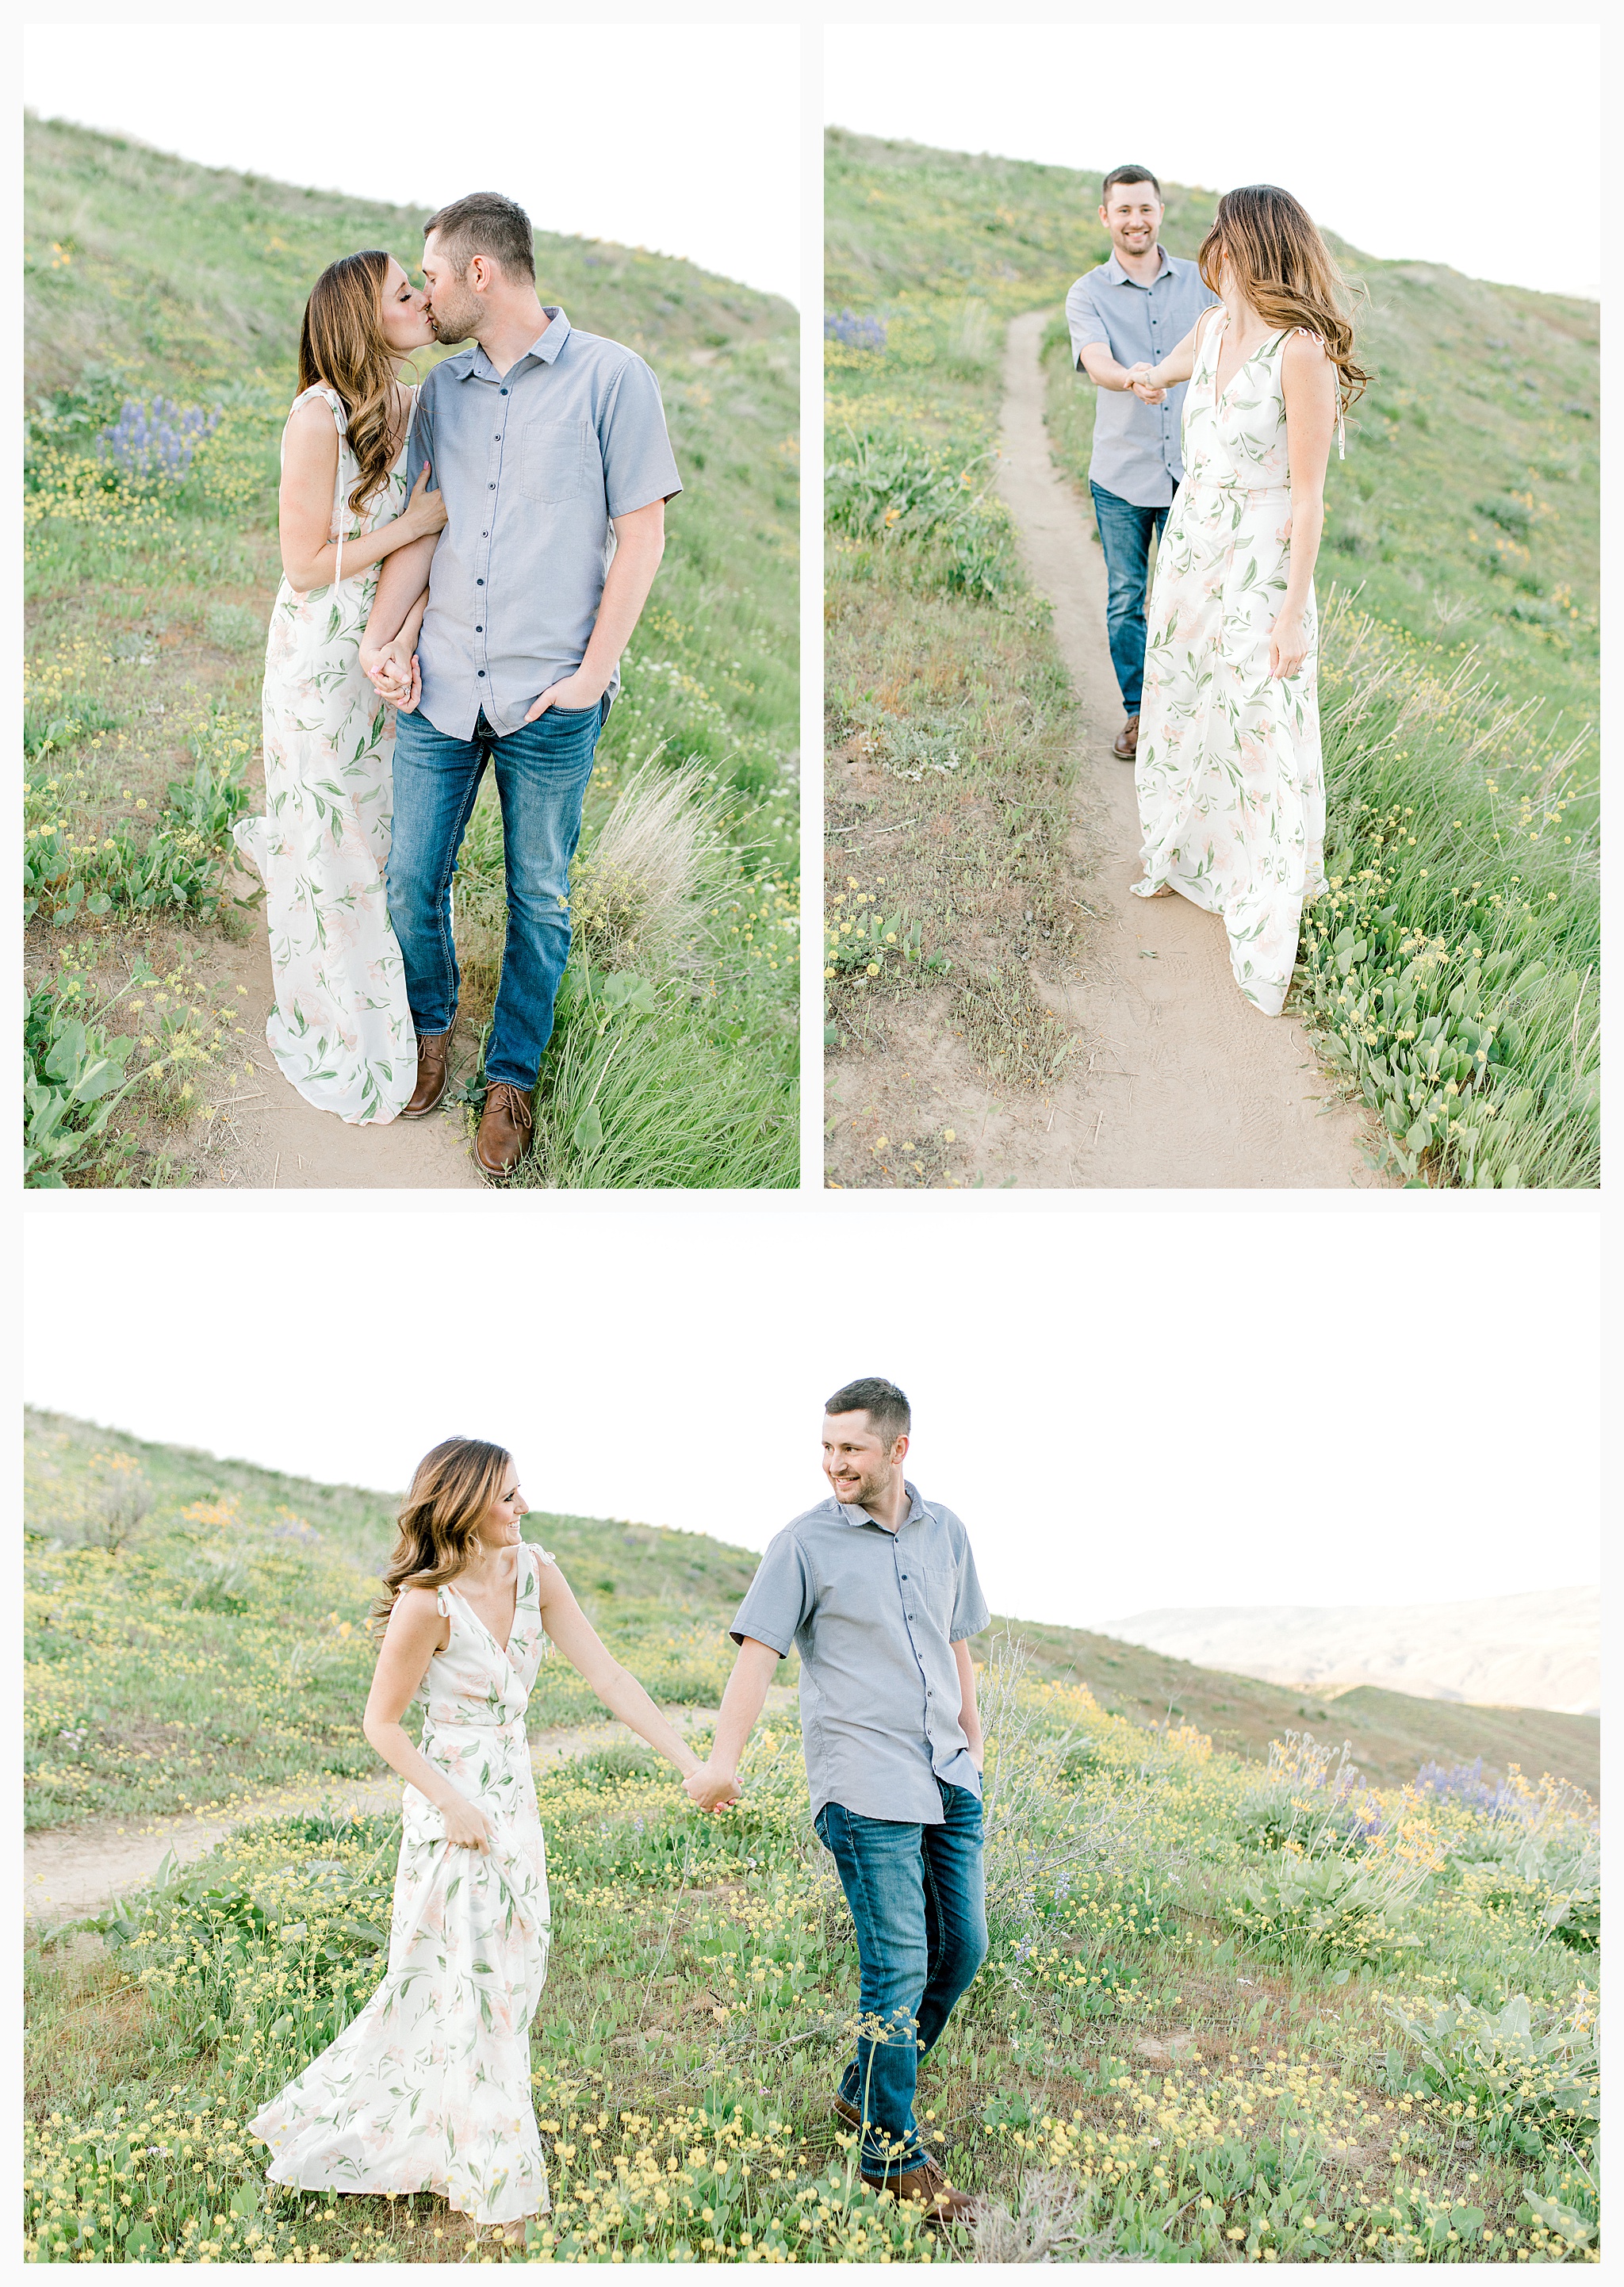 Engagement session amongst the wildflowers in Wenatchee, Washington | Engagement Session Outfit Inspiration for Wedding Photography with Emma Rose Company | Light and Airy PNW Photographer, Seattle Bride_0003.jpg